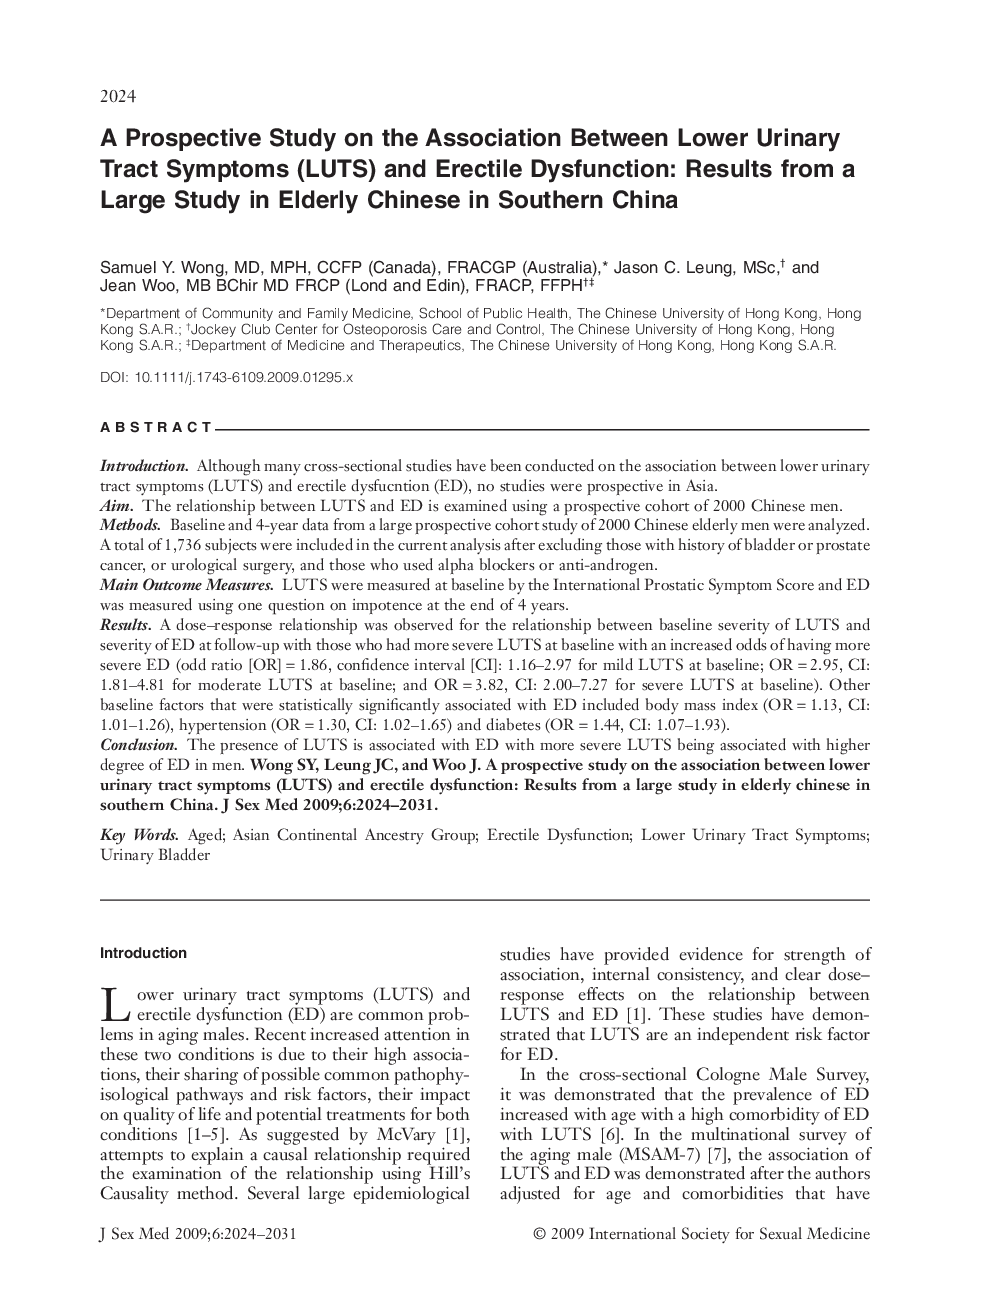 A Prospective Study on the Association Between Lower Urinary Tract Symptoms (LUTS) and Erectile Dysfunction: Results from a Large Study in Elderly Chinese in Southern China